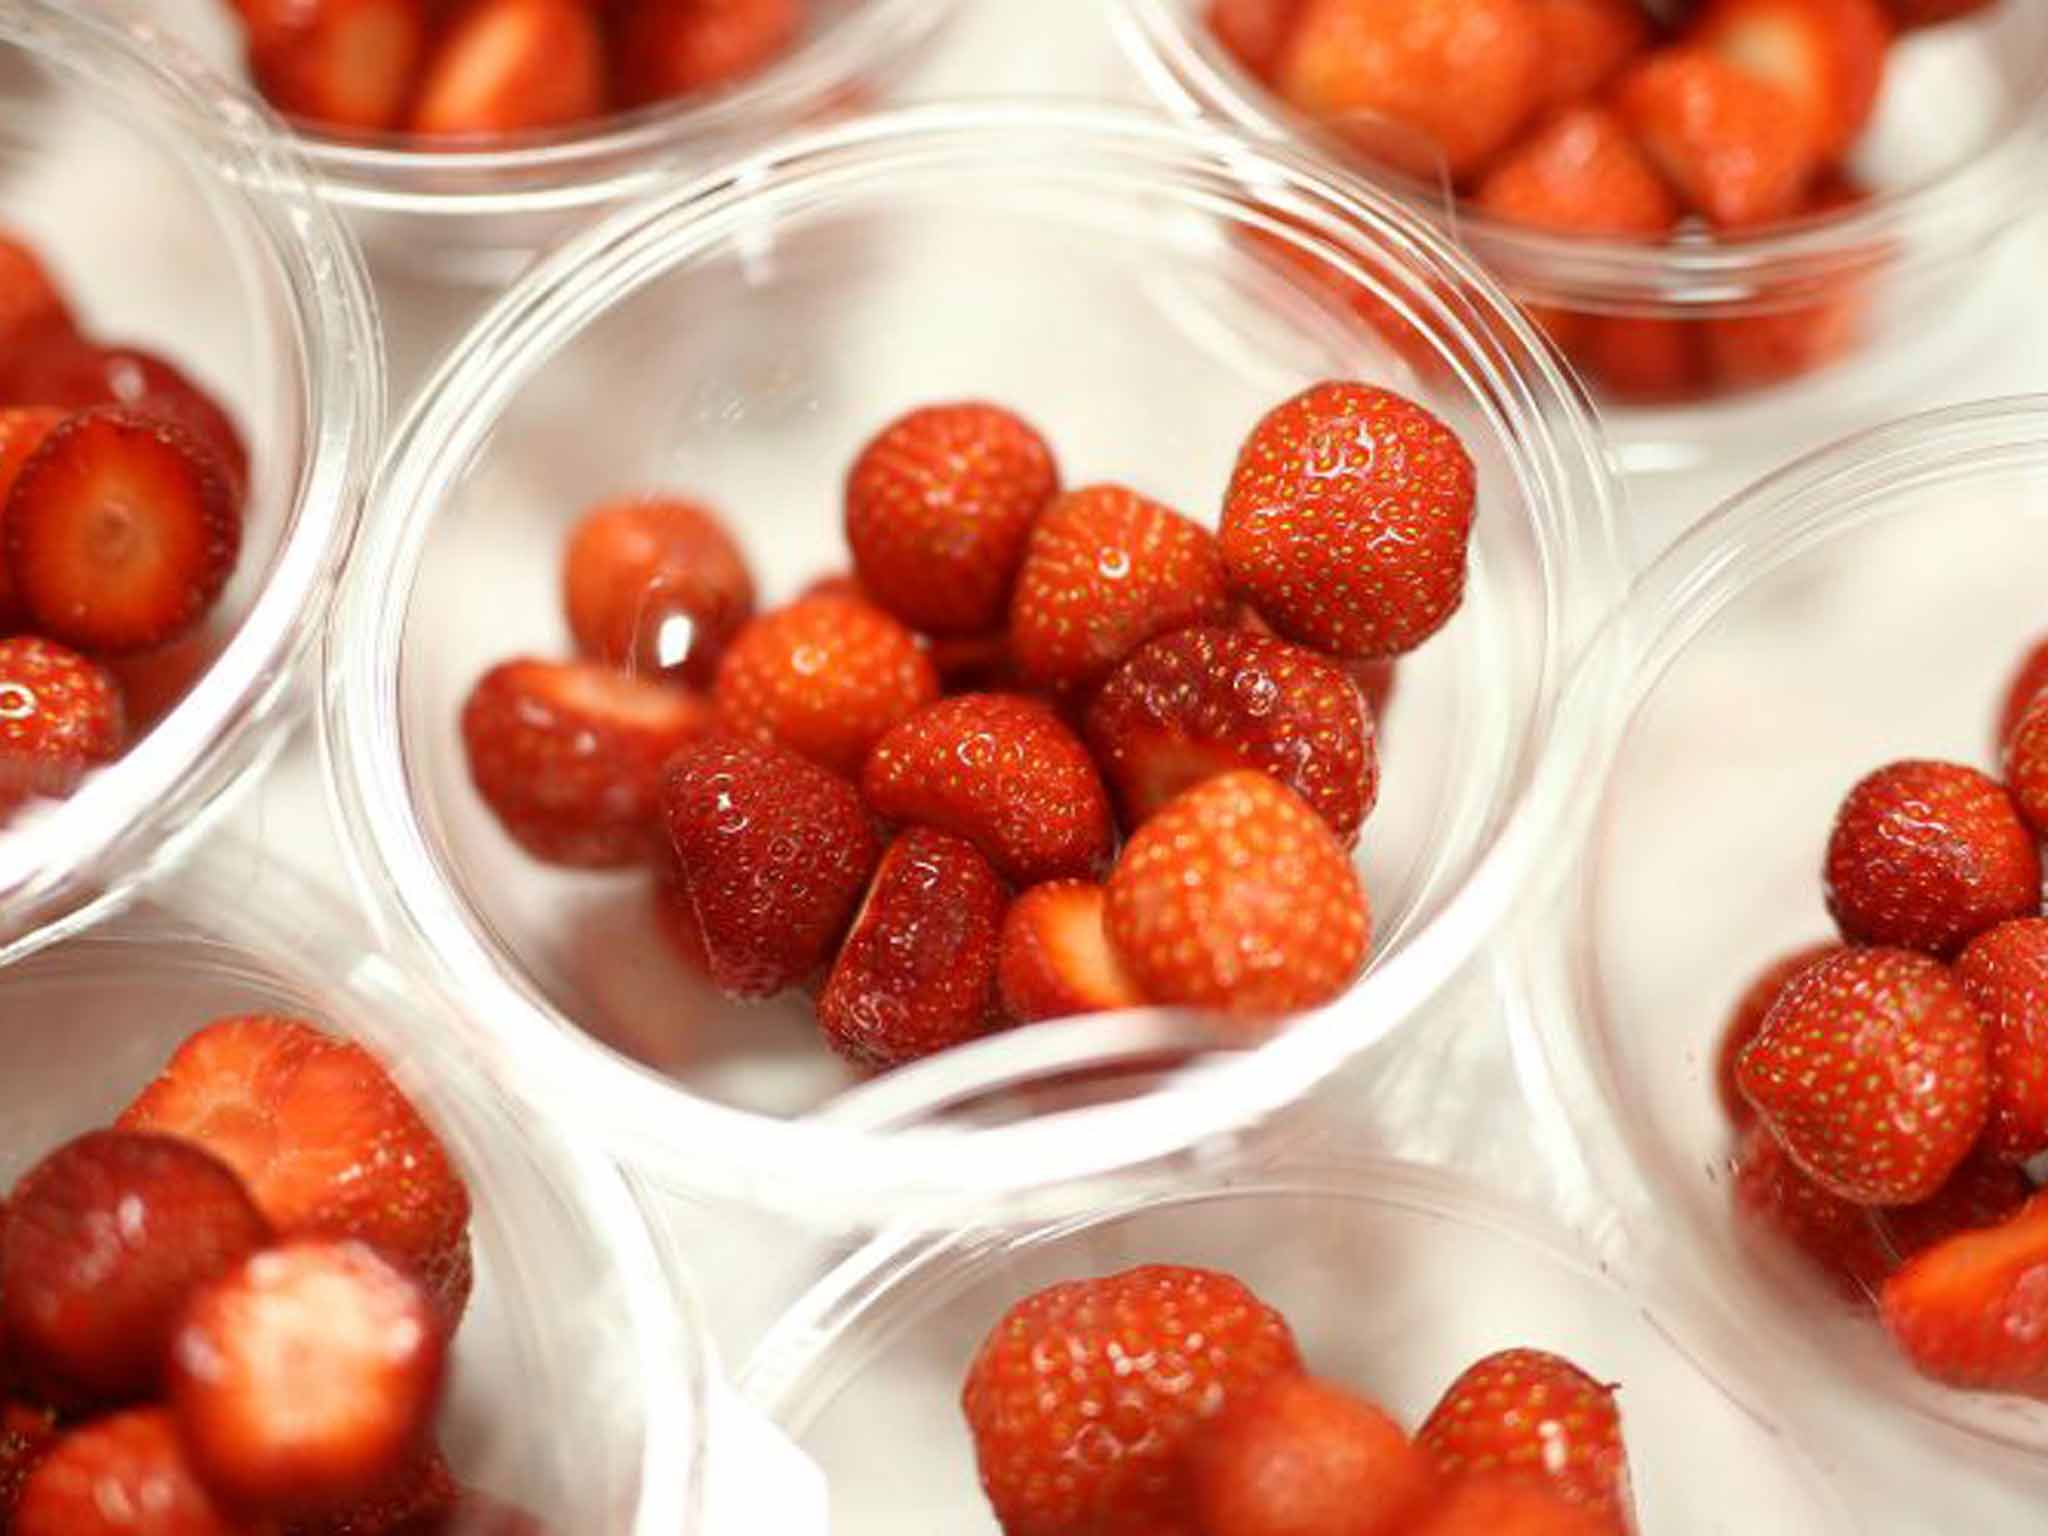 Berry tasty: strawberries and cream were served at Wimbledon during the first tournament in 1877